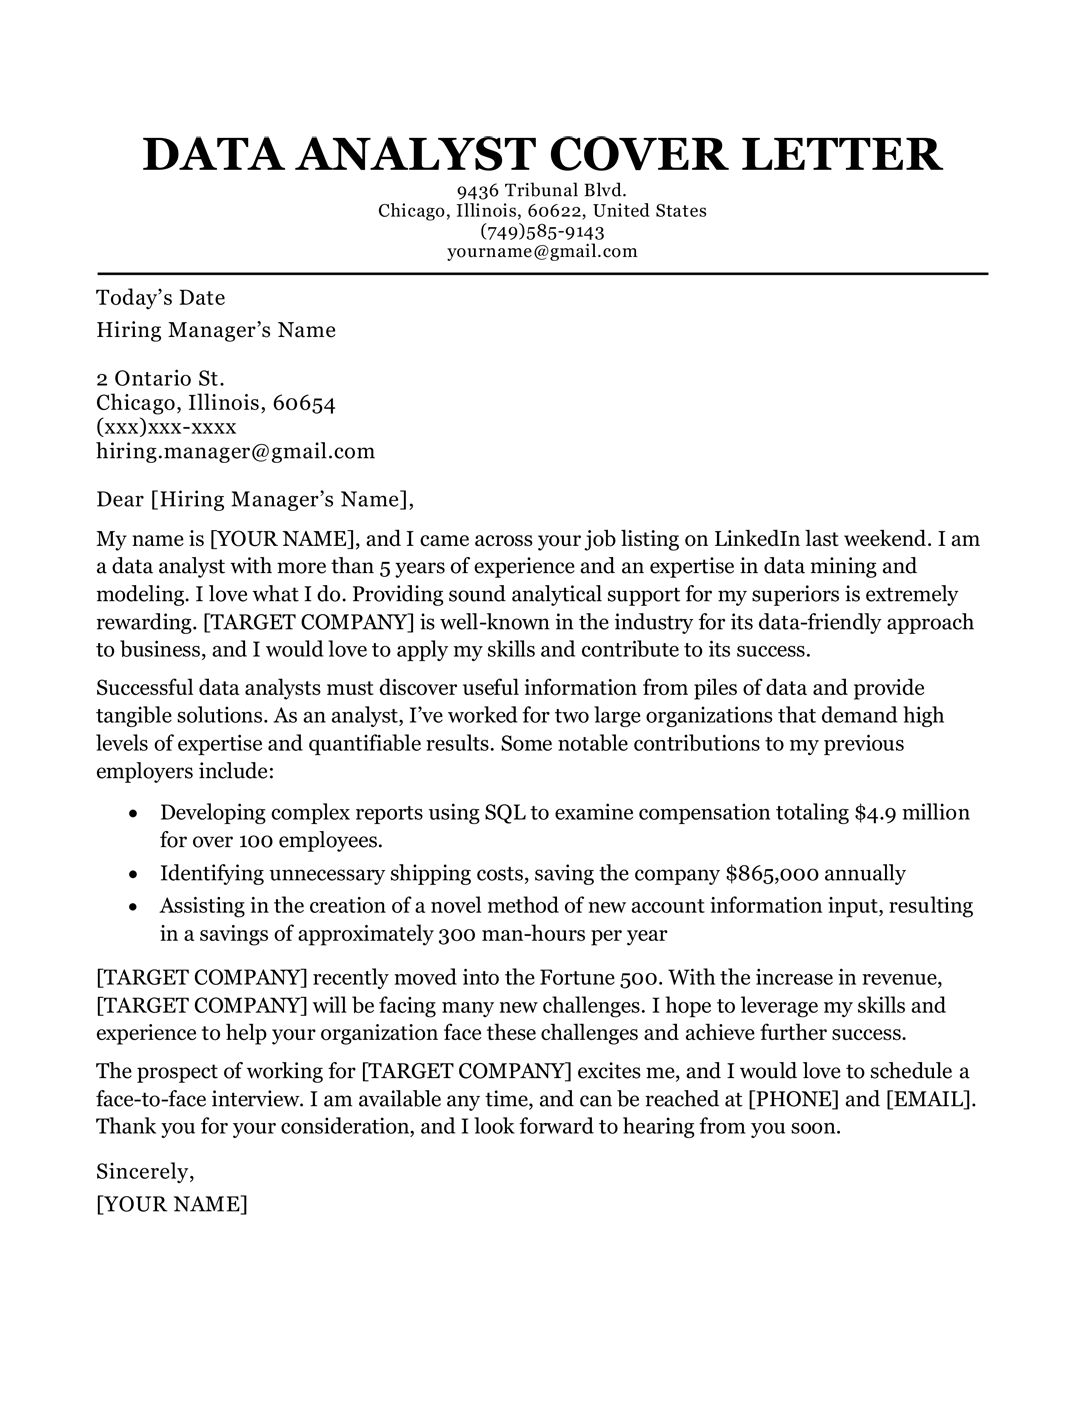 Financial Analyst Cover Letter Sample from resumecompanion.com